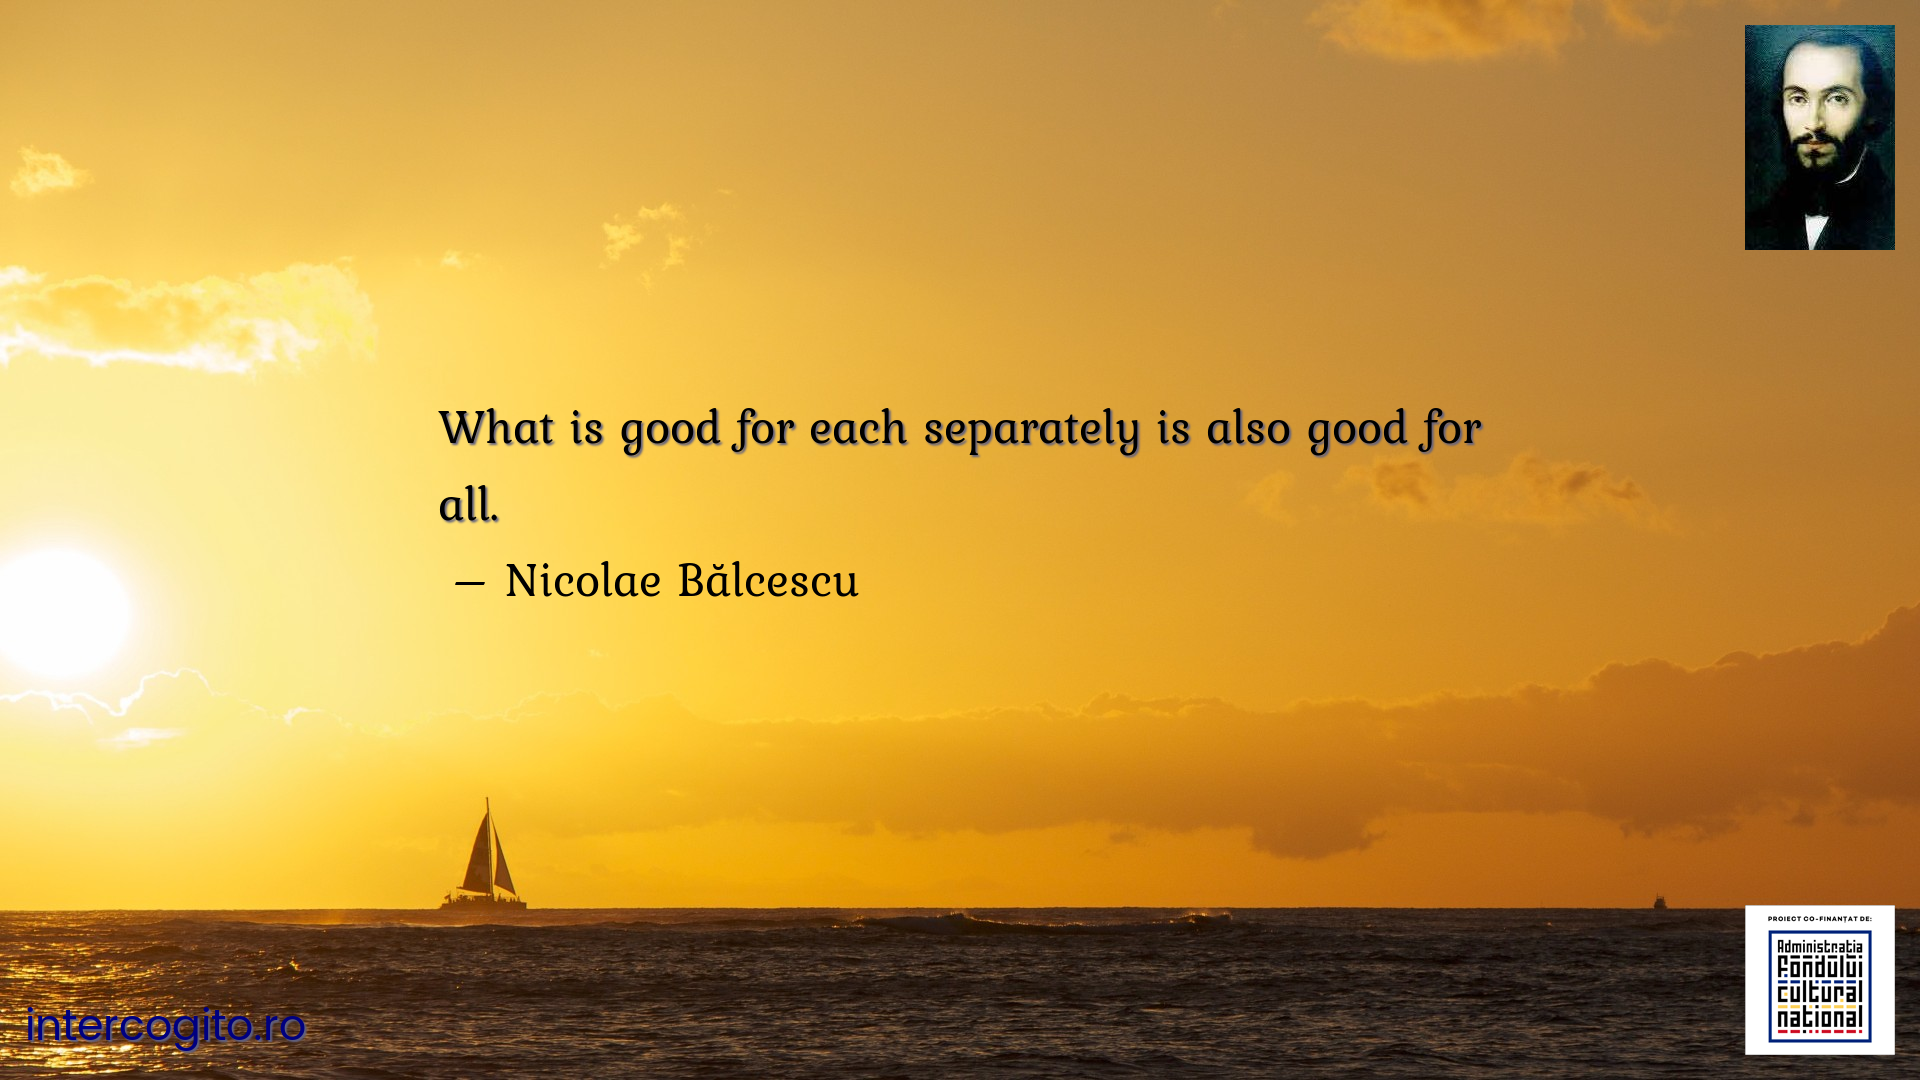 What is good for each separately is also good for all.